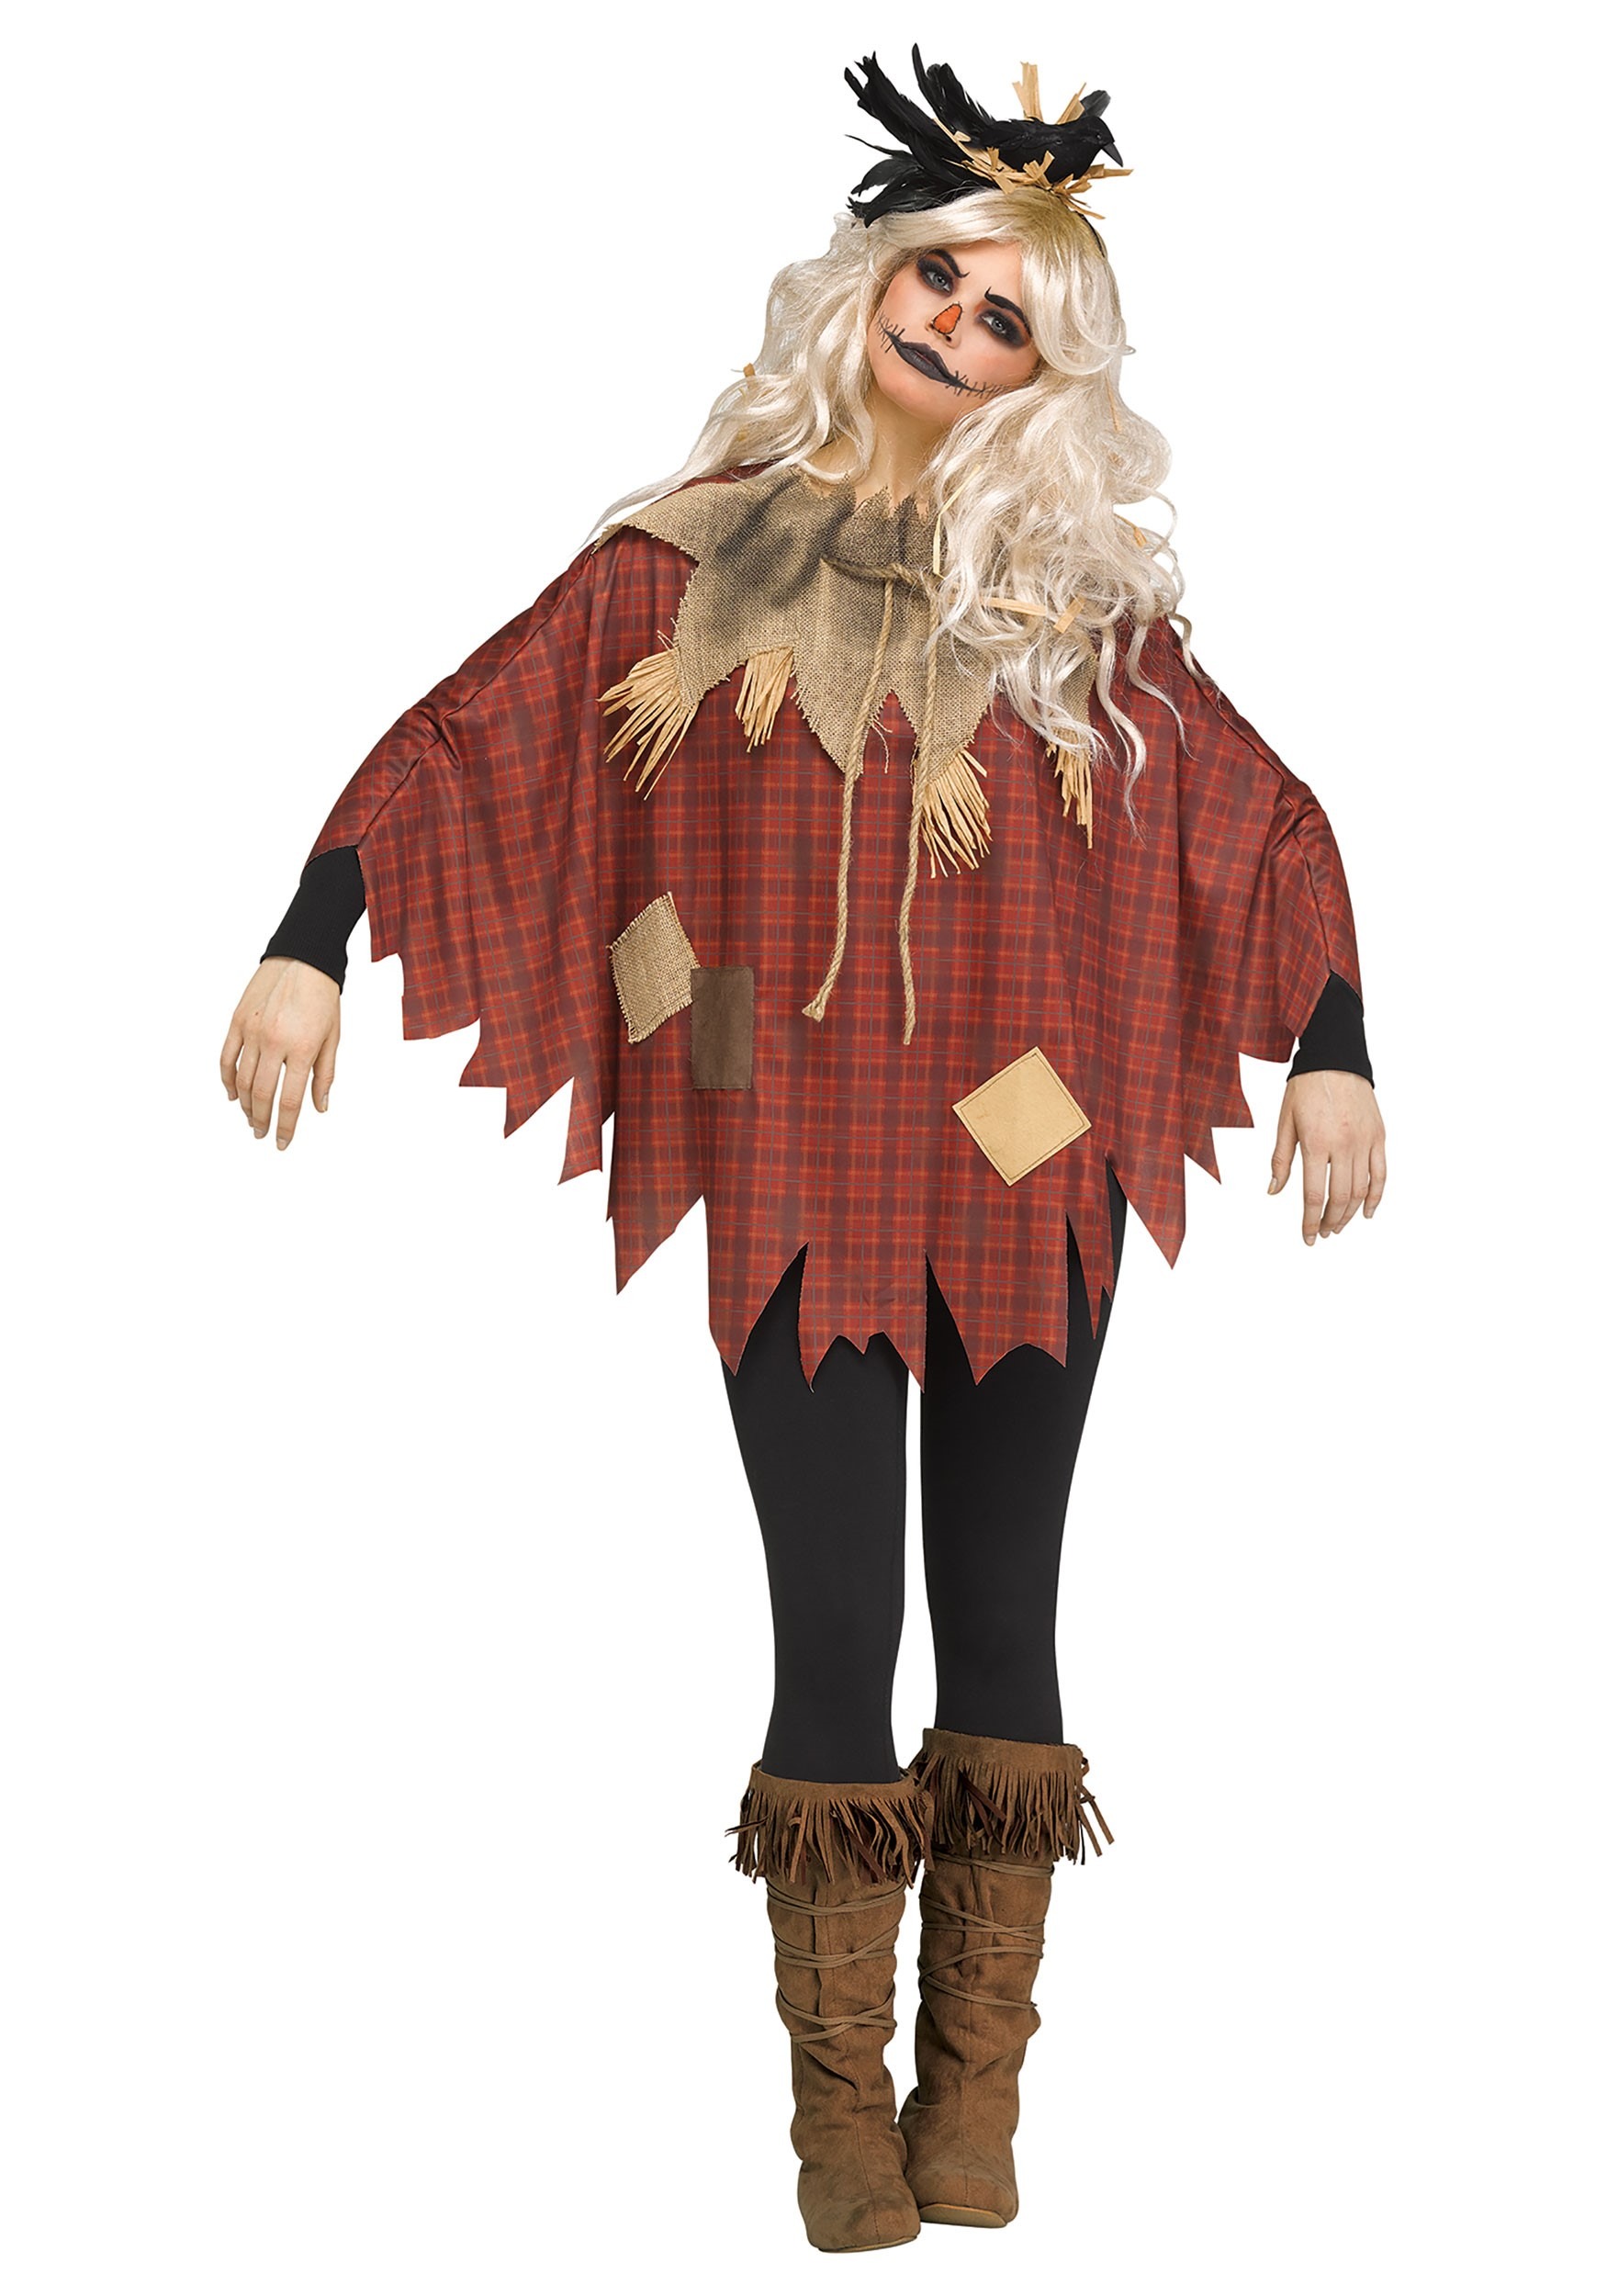 10 Creative Women's Scarecrow Costume Ideas That Will Turn Heads!